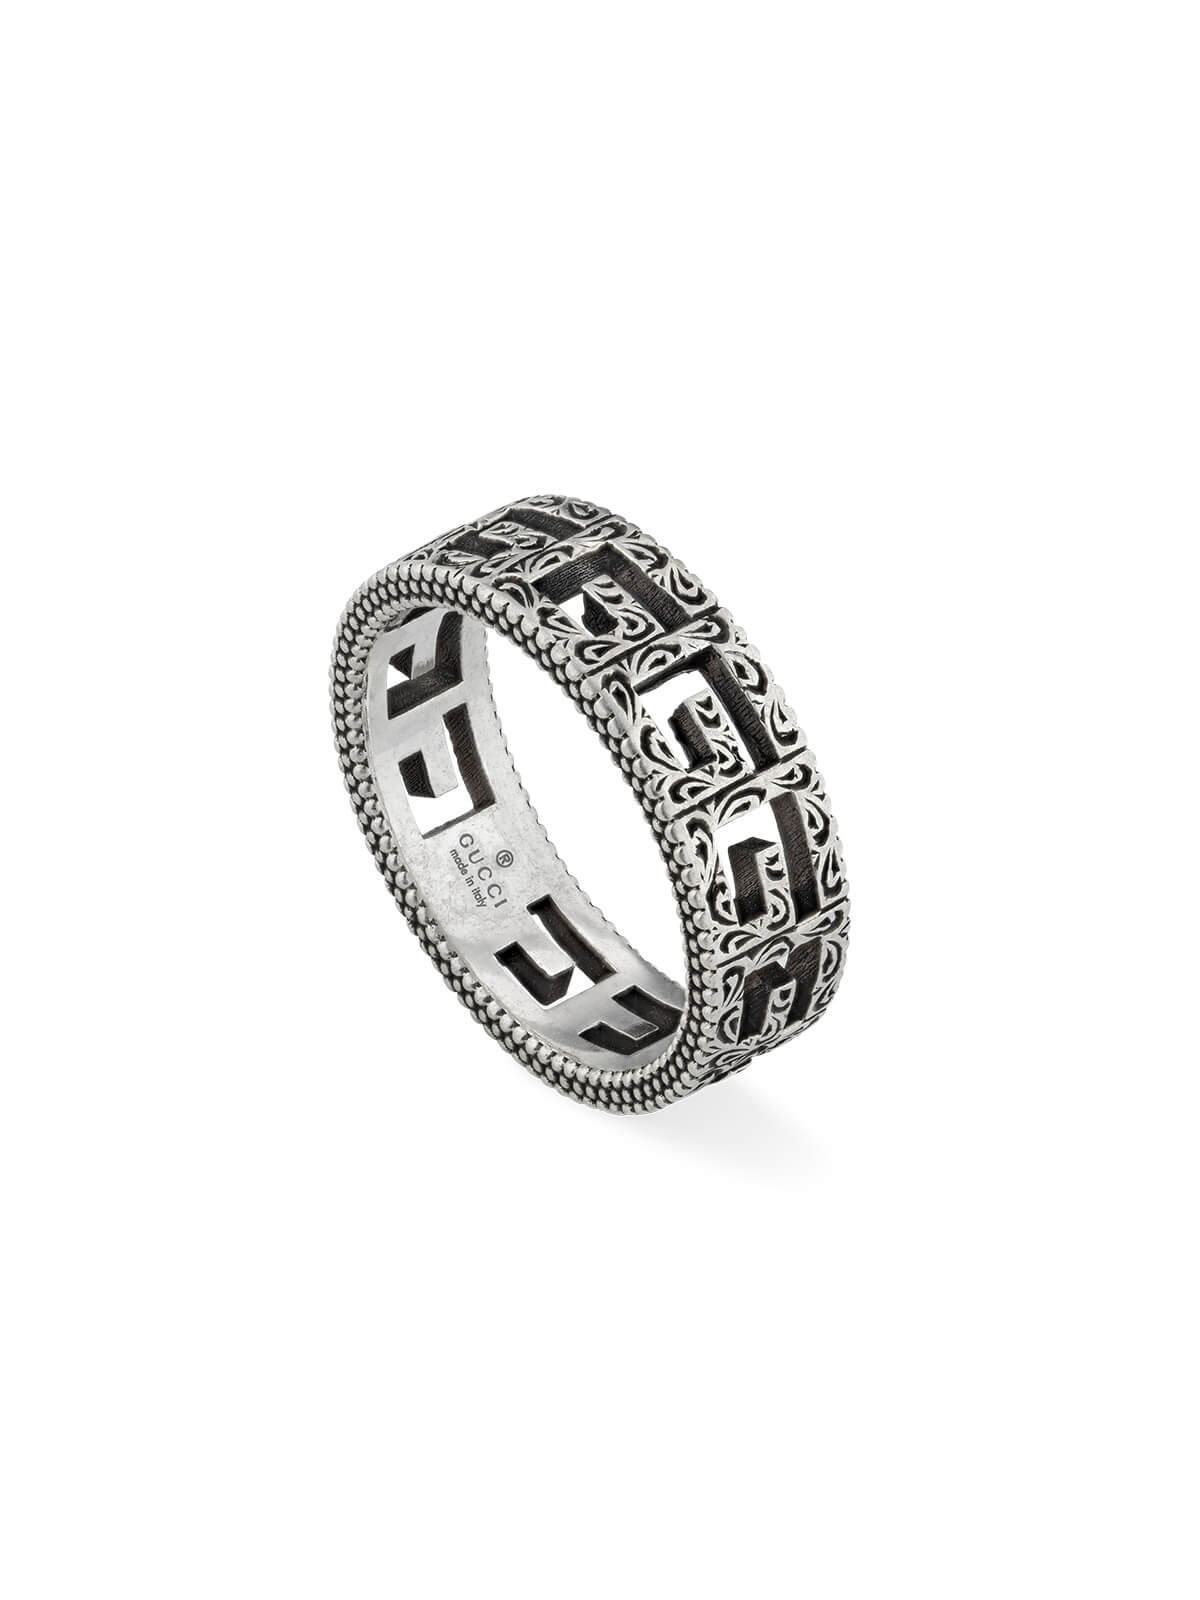 Gucci G-Cube Ring 6mm in Silver - Size 16